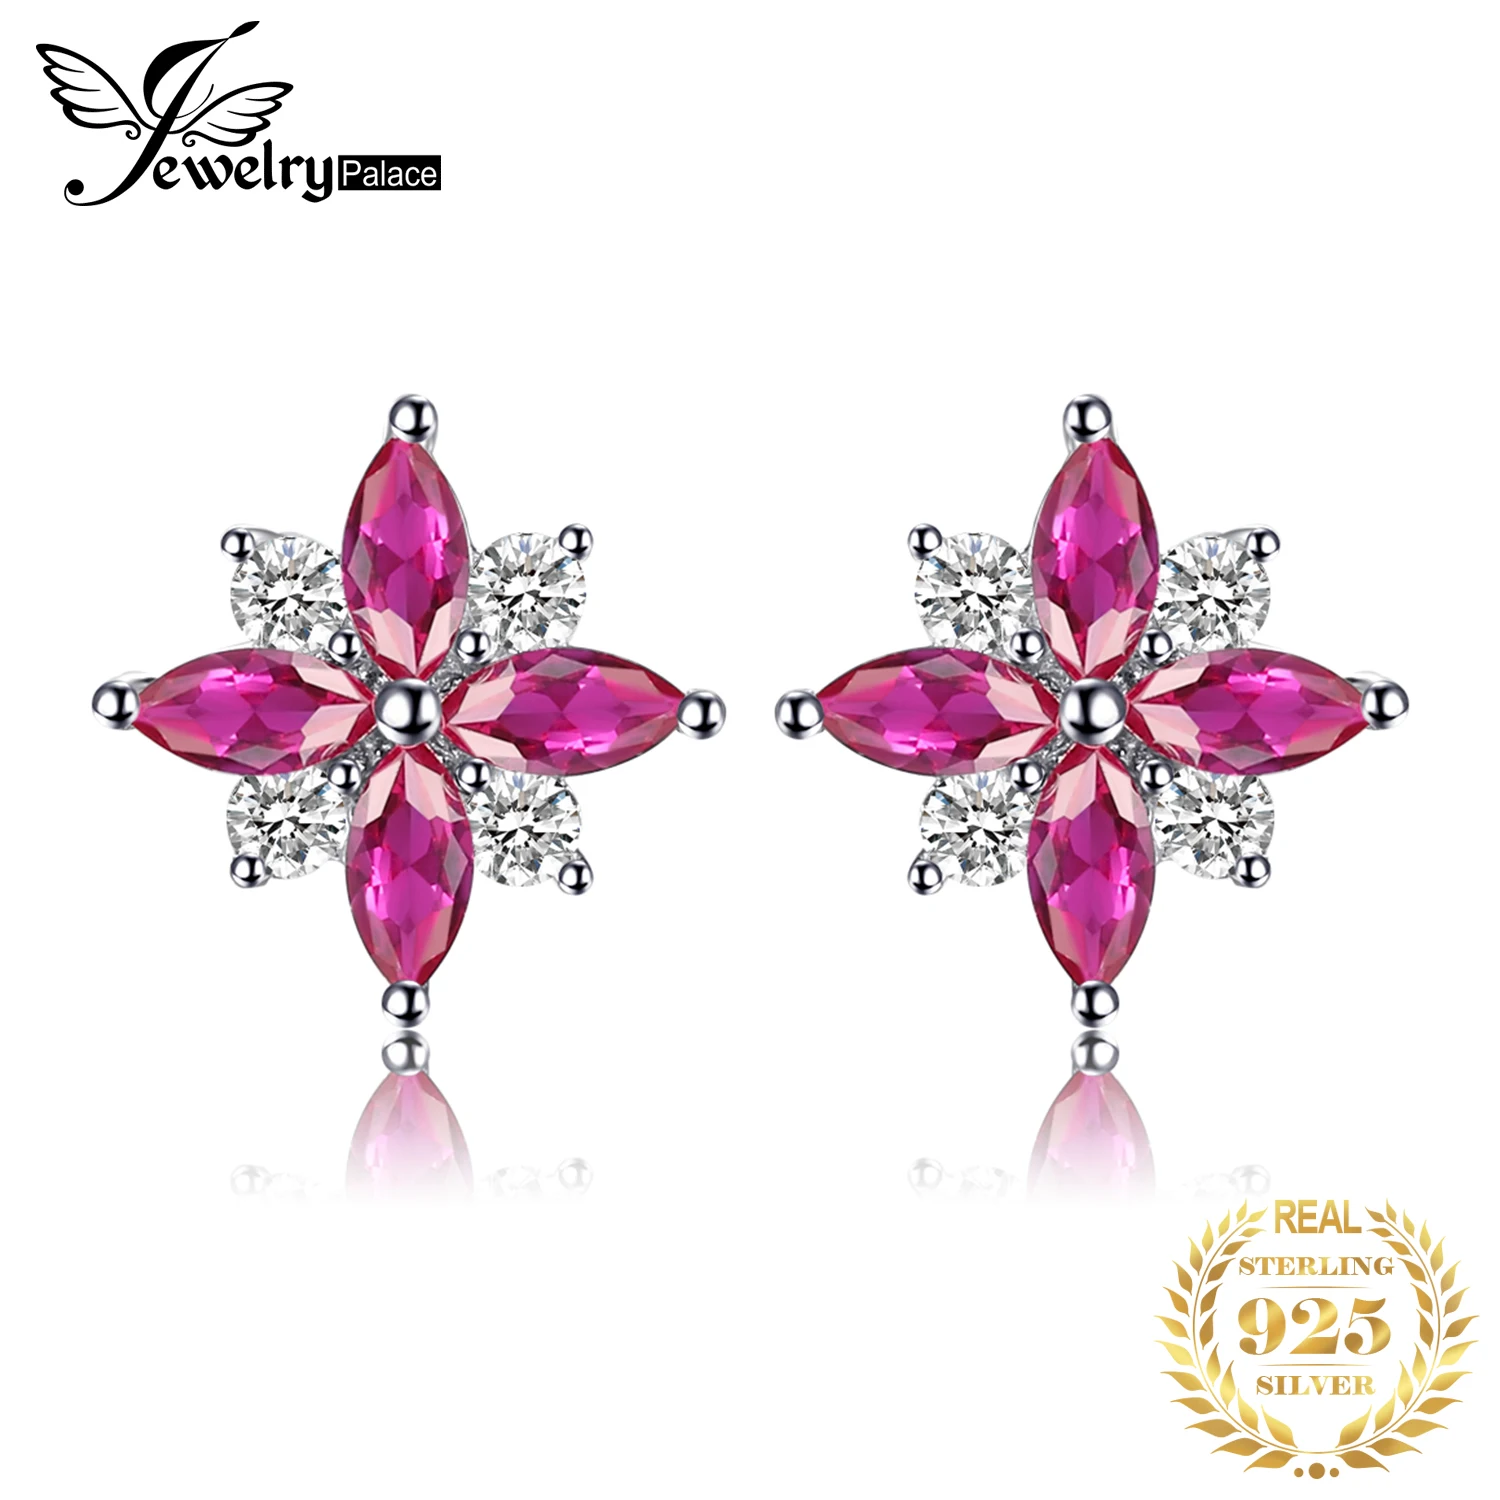 JewelryPalace Flower Cross Created Ruby 925 Sterling Silver Stud Earrings for Woman Statement Gemstone Jewelry Birthday Gift